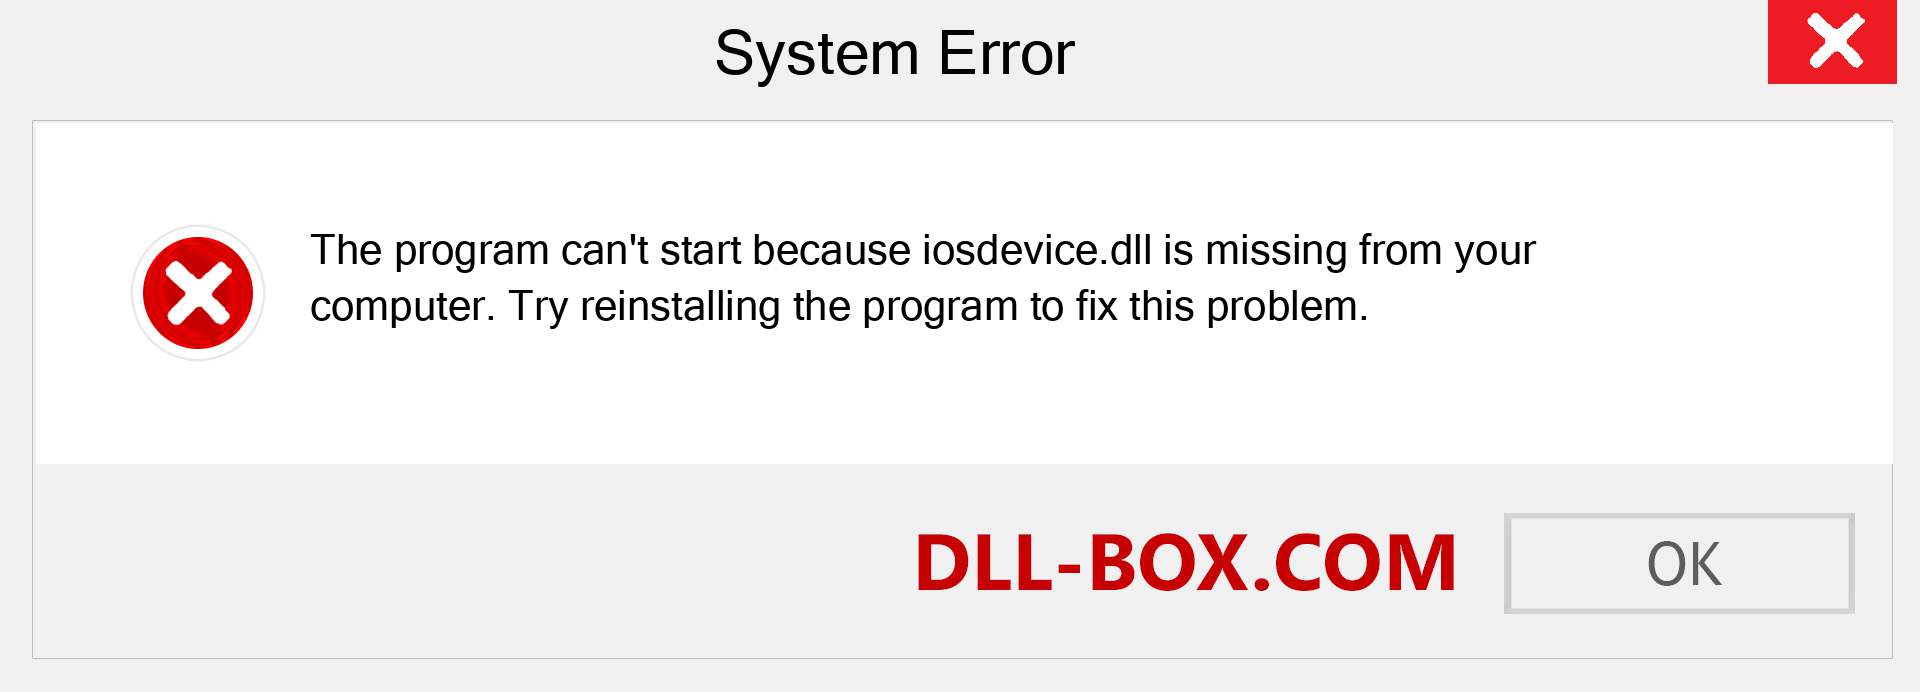  iosdevice.dll file is missing?. Download for Windows 7, 8, 10 - Fix  iosdevice dll Missing Error on Windows, photos, images